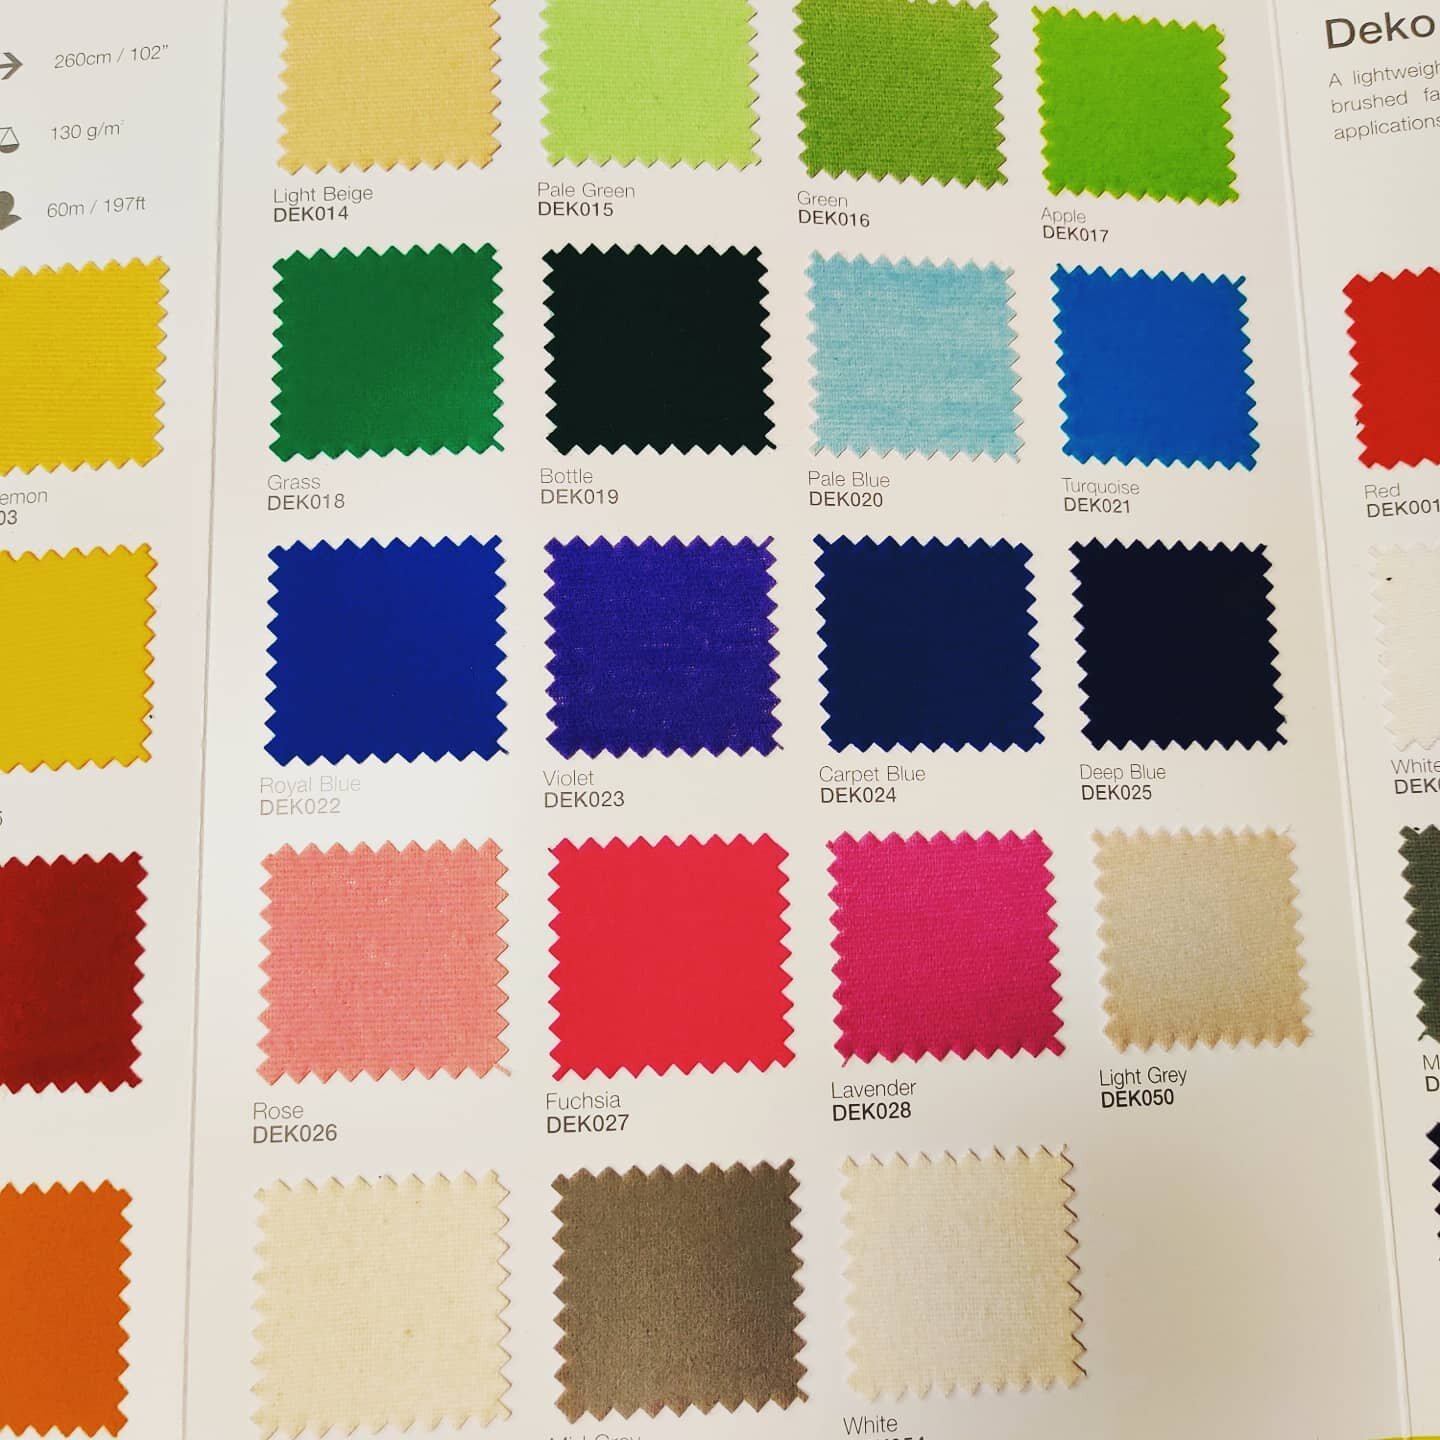 Pick a colour any colour?
From choosing fabric samples to watching it come to life!
-
-
-
-
-
-
-
-
-
-
#design #designer #theatre #theatremakers #theatredesign #theatredirector #theatrelife #fabric #fabricswatches #sceneography #rwcmddesign #rwcmdcr